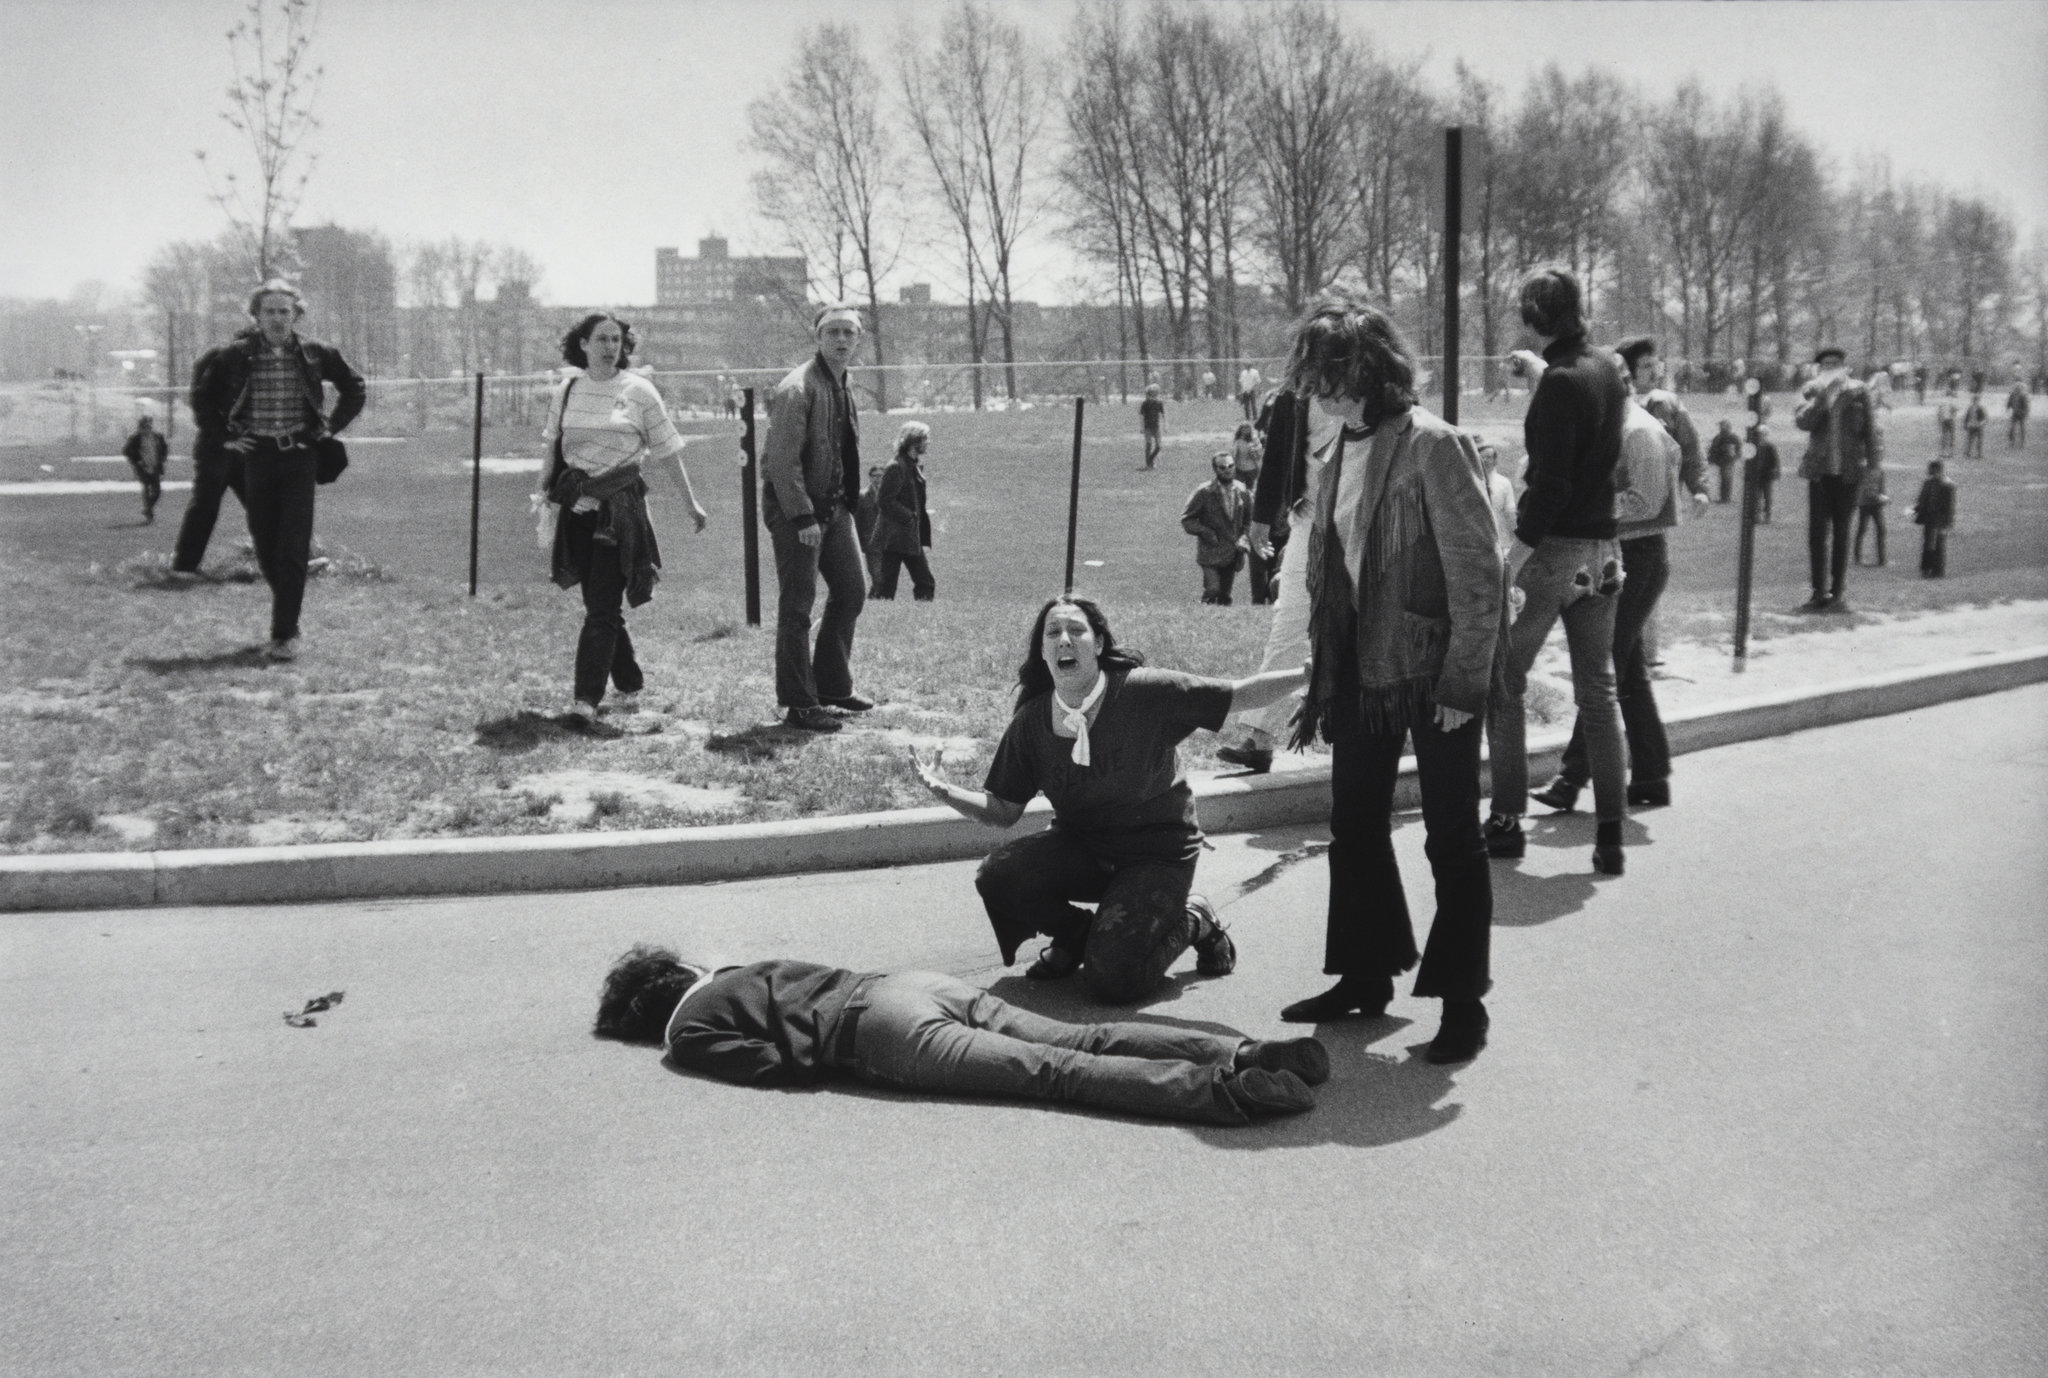 50 Years Ago Today: Four Students Were Killed at Kent State, Inspiring “Ohio” and Changing A Generation